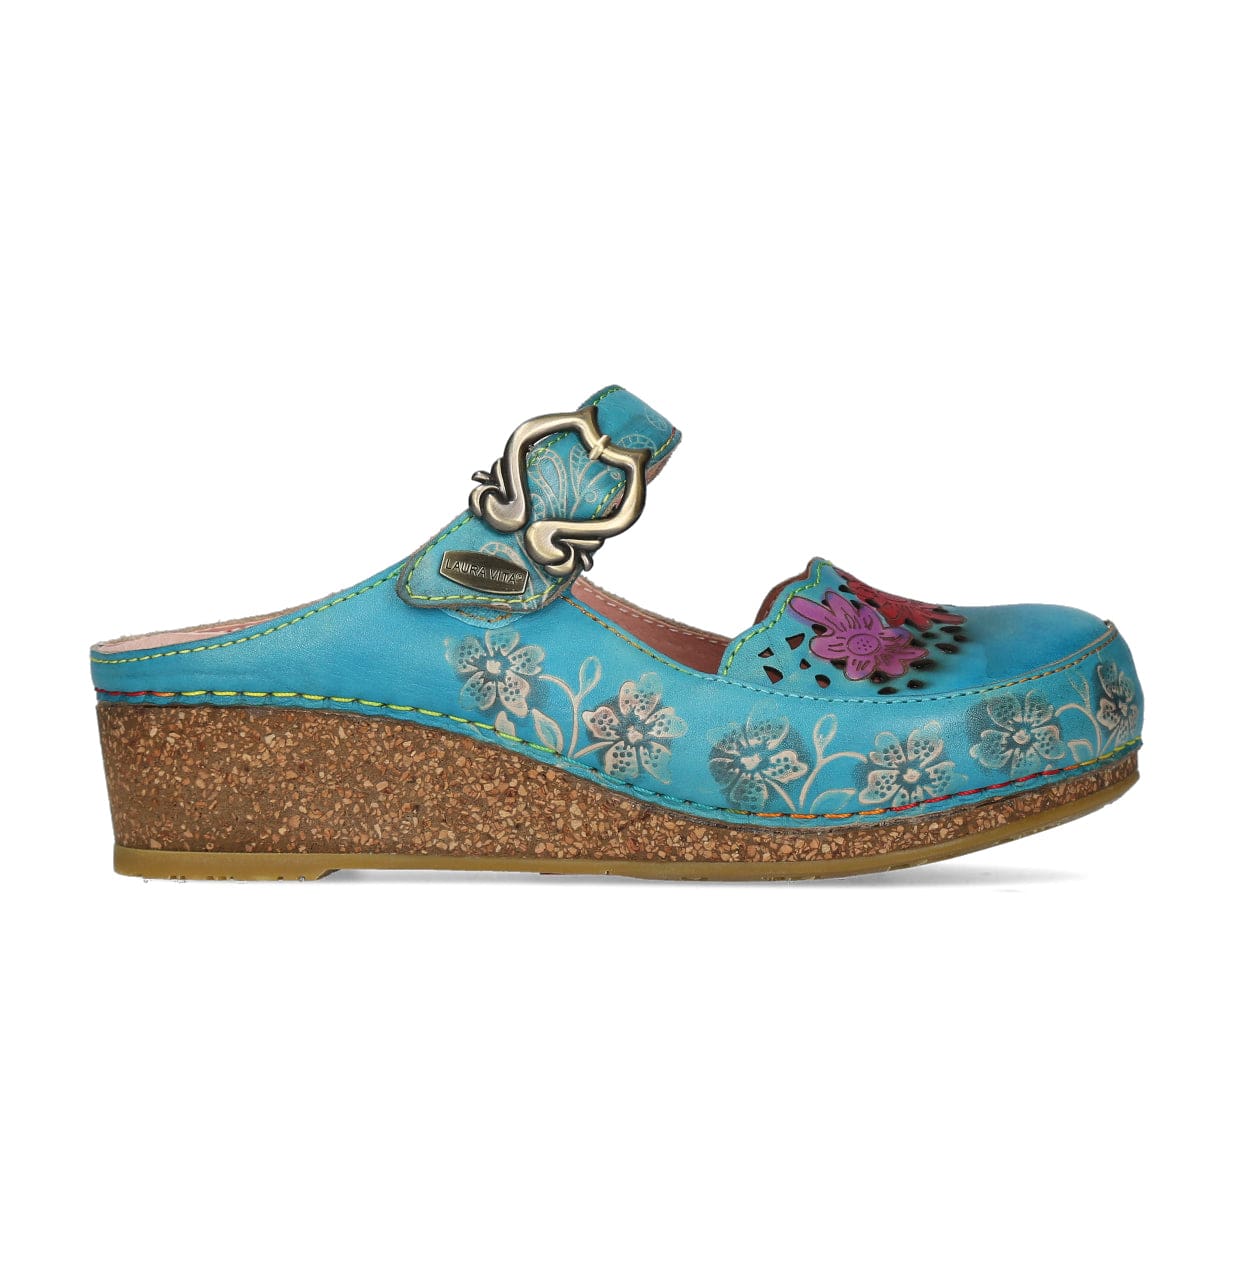 Chaussures FACSCINEO 33 - 35 / Turquoise - Mule